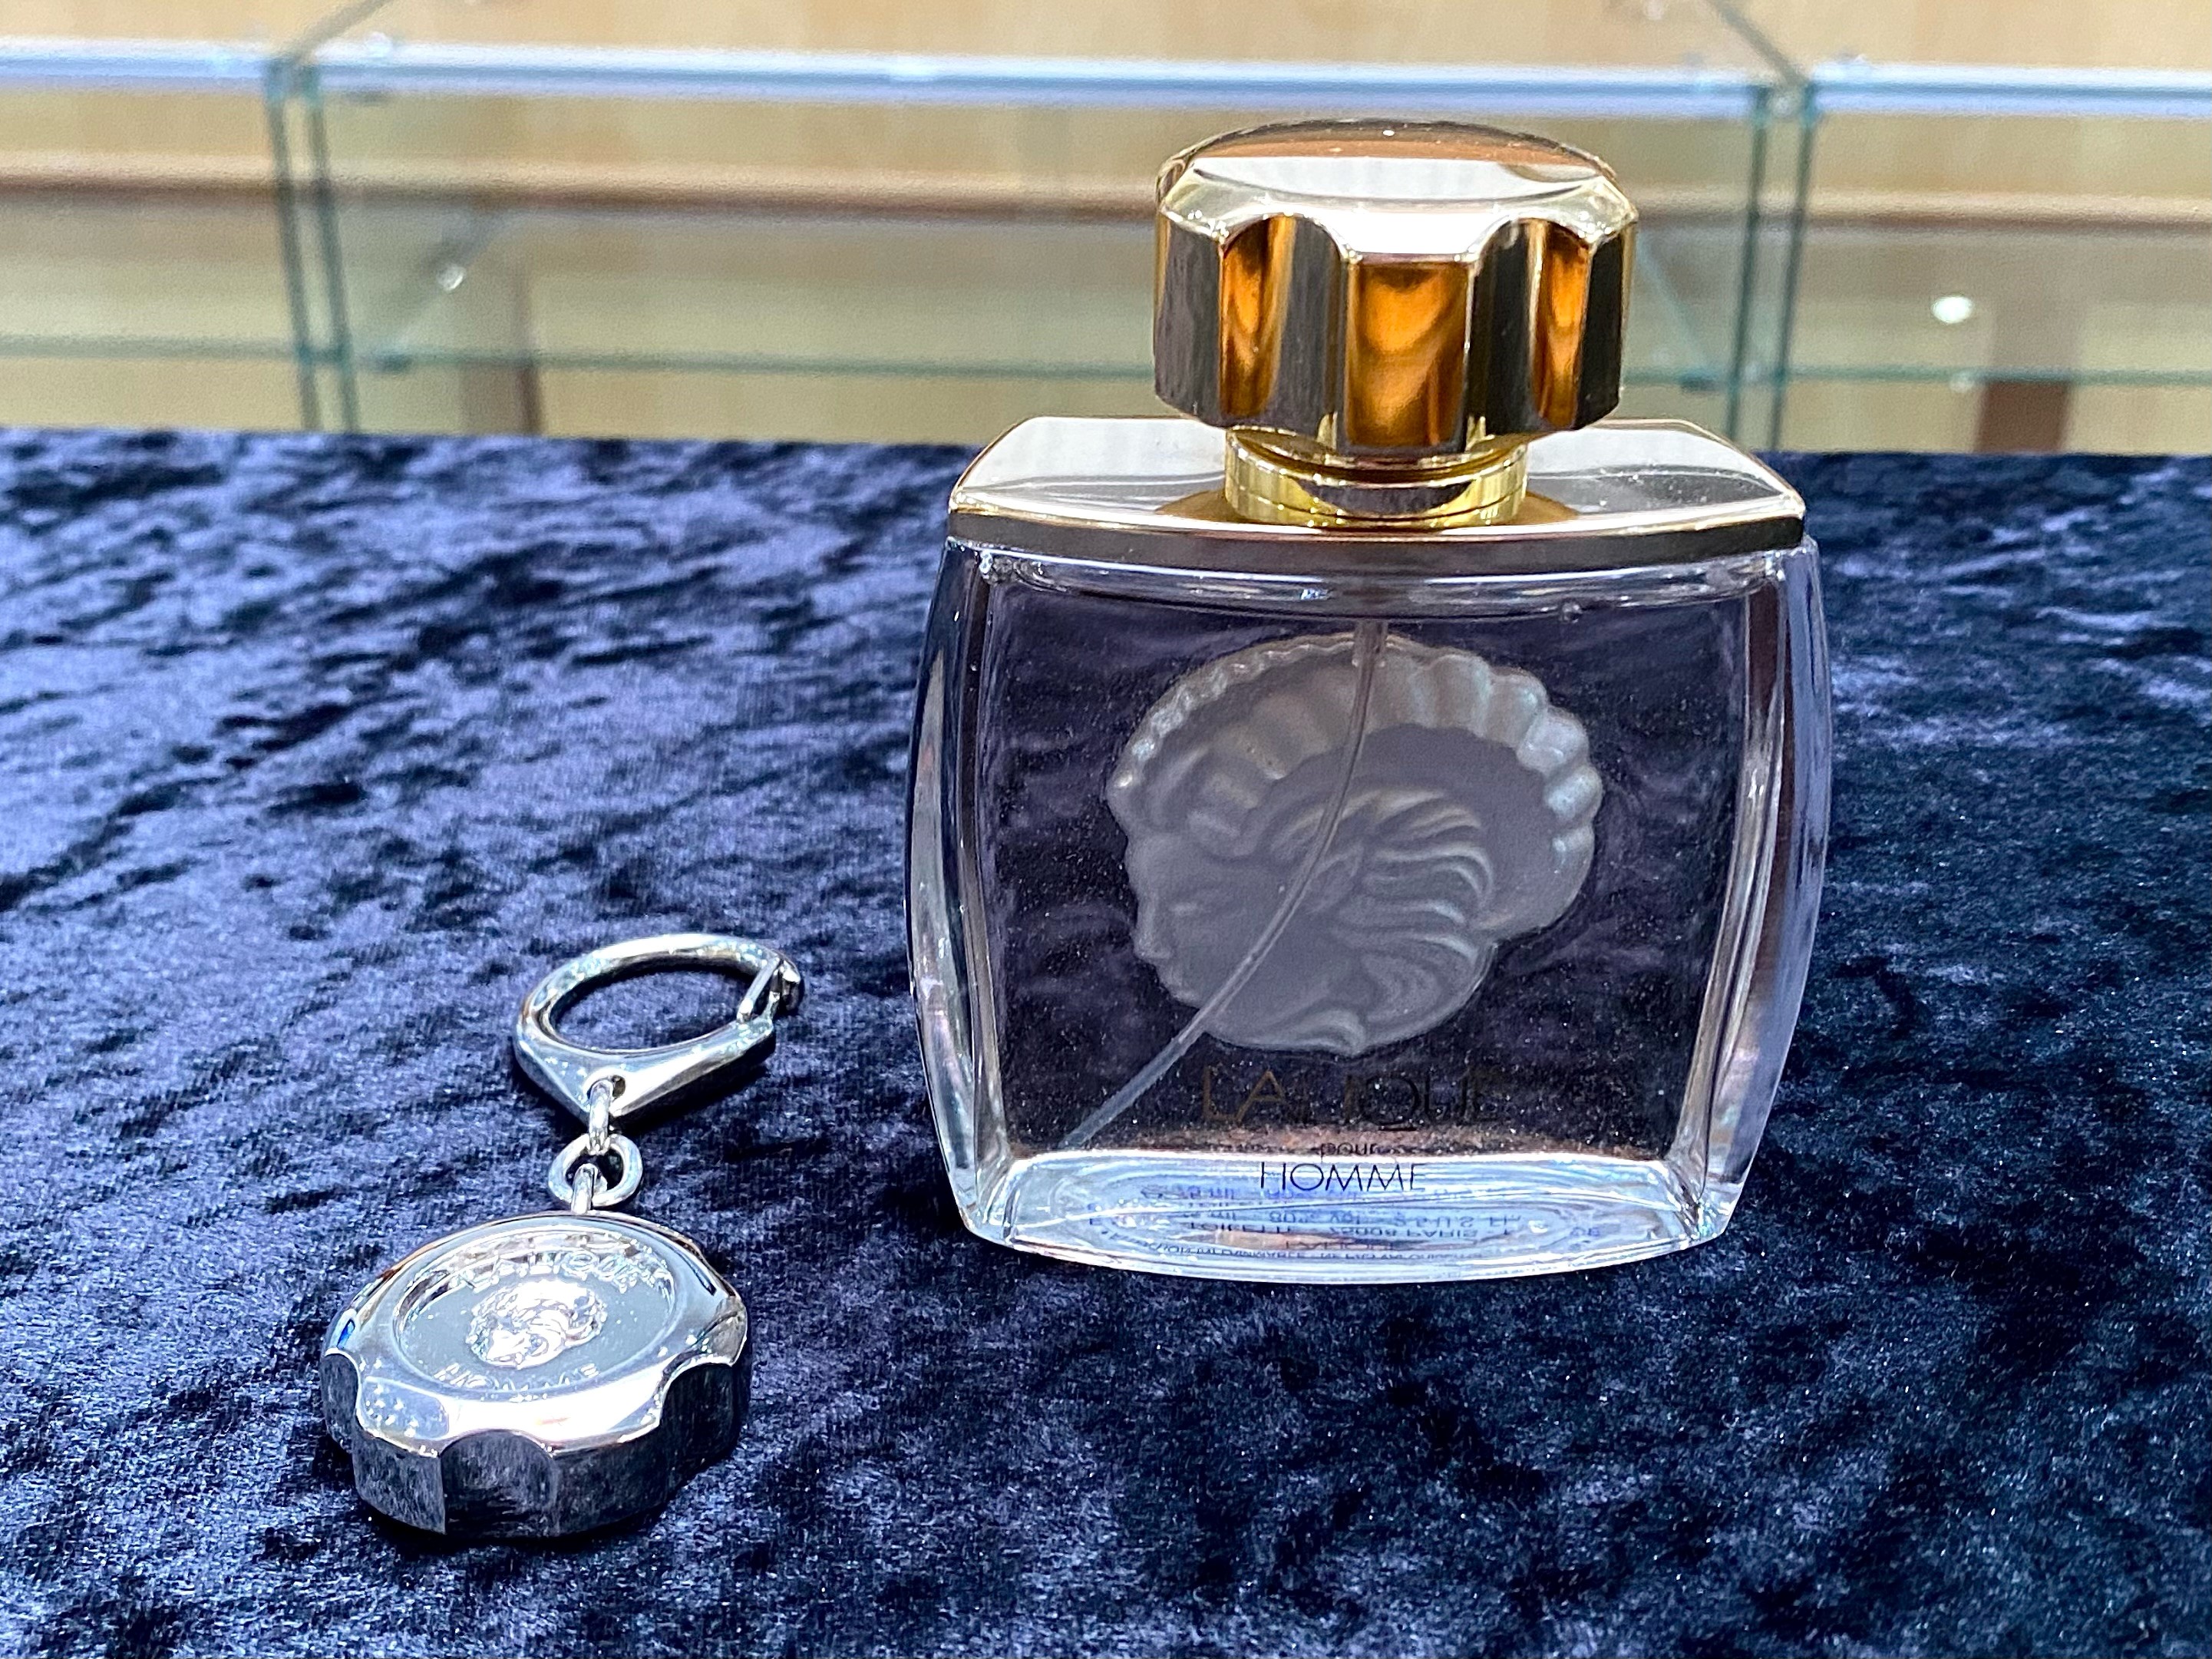 Gentleman's Lalique Perfume Set in Presentation Box, with keyring. - Image 2 of 2